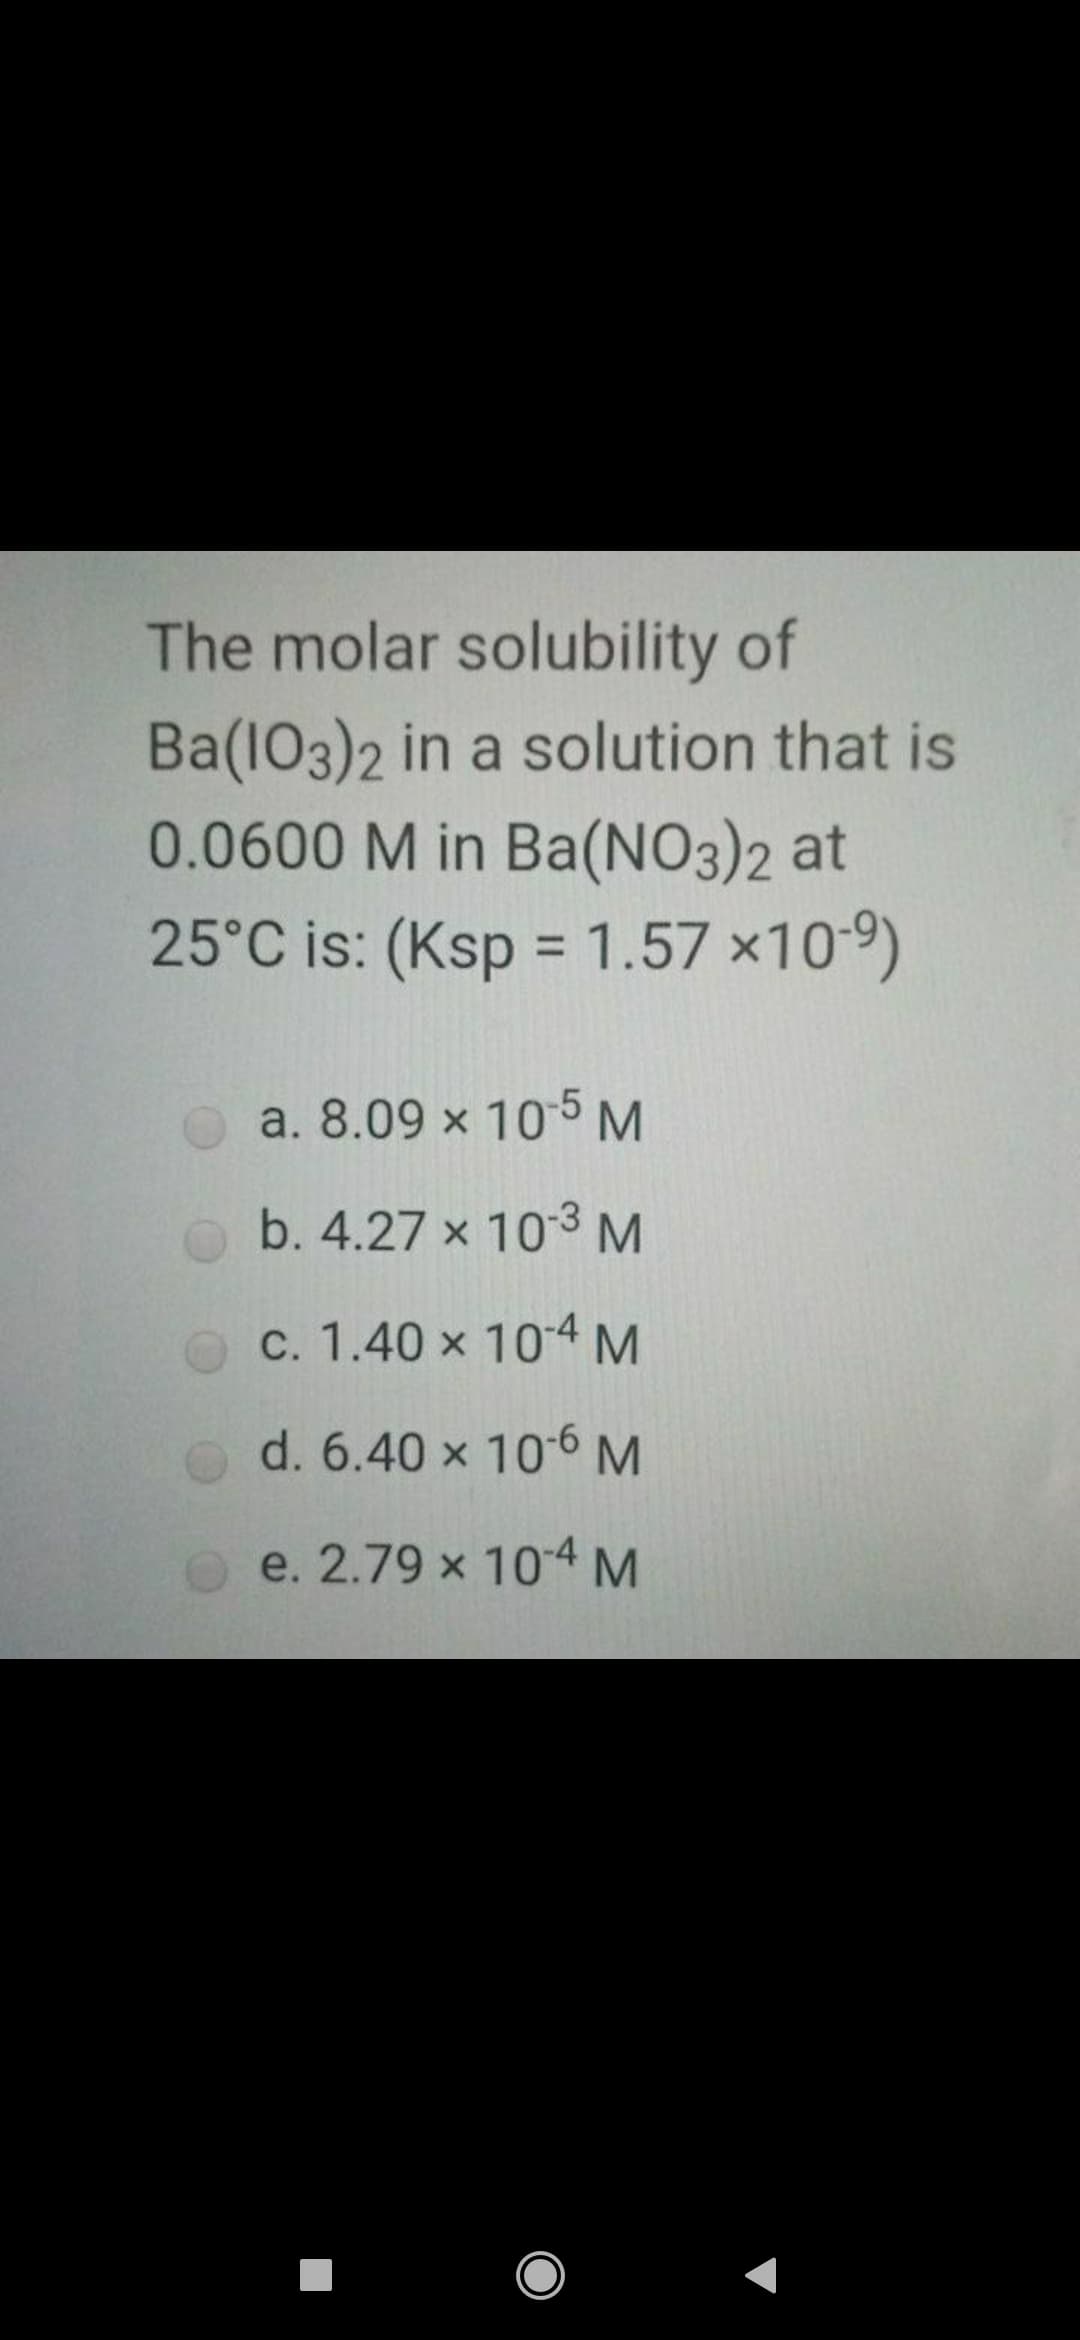 The molar solubility of
Ba(103)2 in a solution that is
0.0600 M in Ba(NO3)2 at
25°C is: (Ksp = 1.57 x10-9)
%3D
a. 8.09 x 105M
b. 4.27 x 103 M
c. 1.40 x 104M
d. 6.40 x 106M
e. 2.79 x 104M
